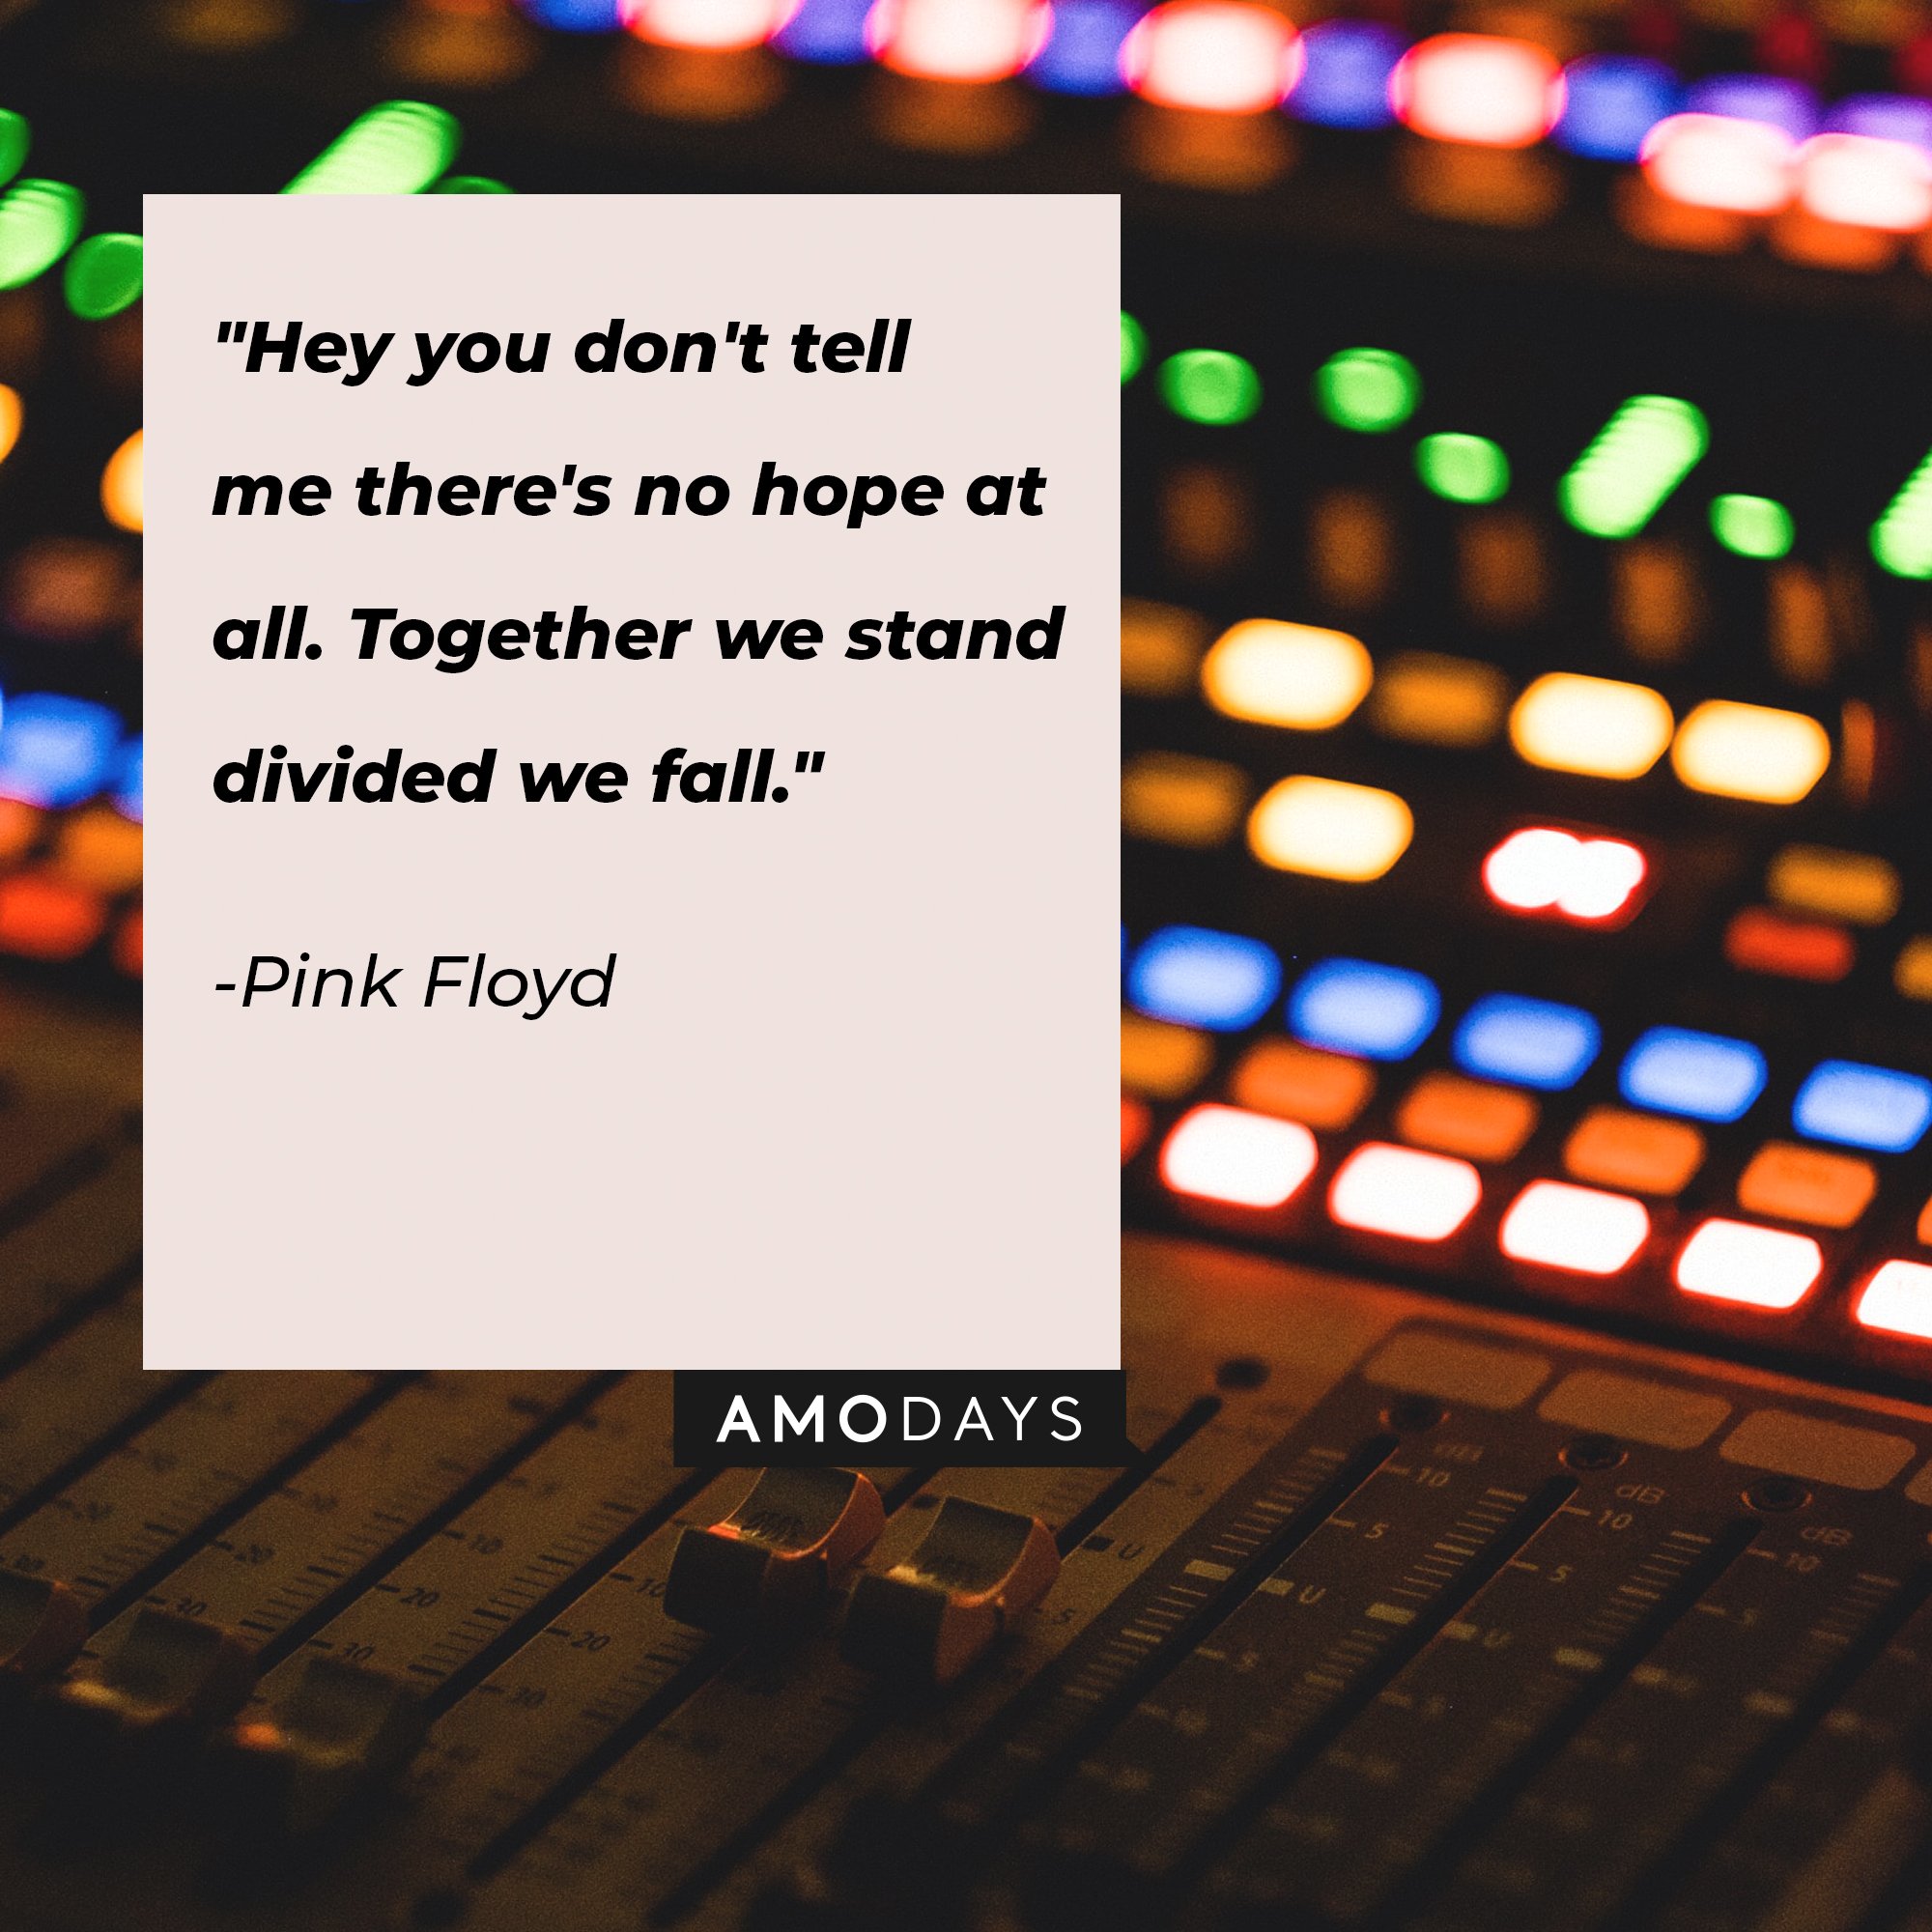 Pink Floyd's quote: "Hey you don't tell me there's no hope at all. Together we stand divided we fall." | Image: AmoDays